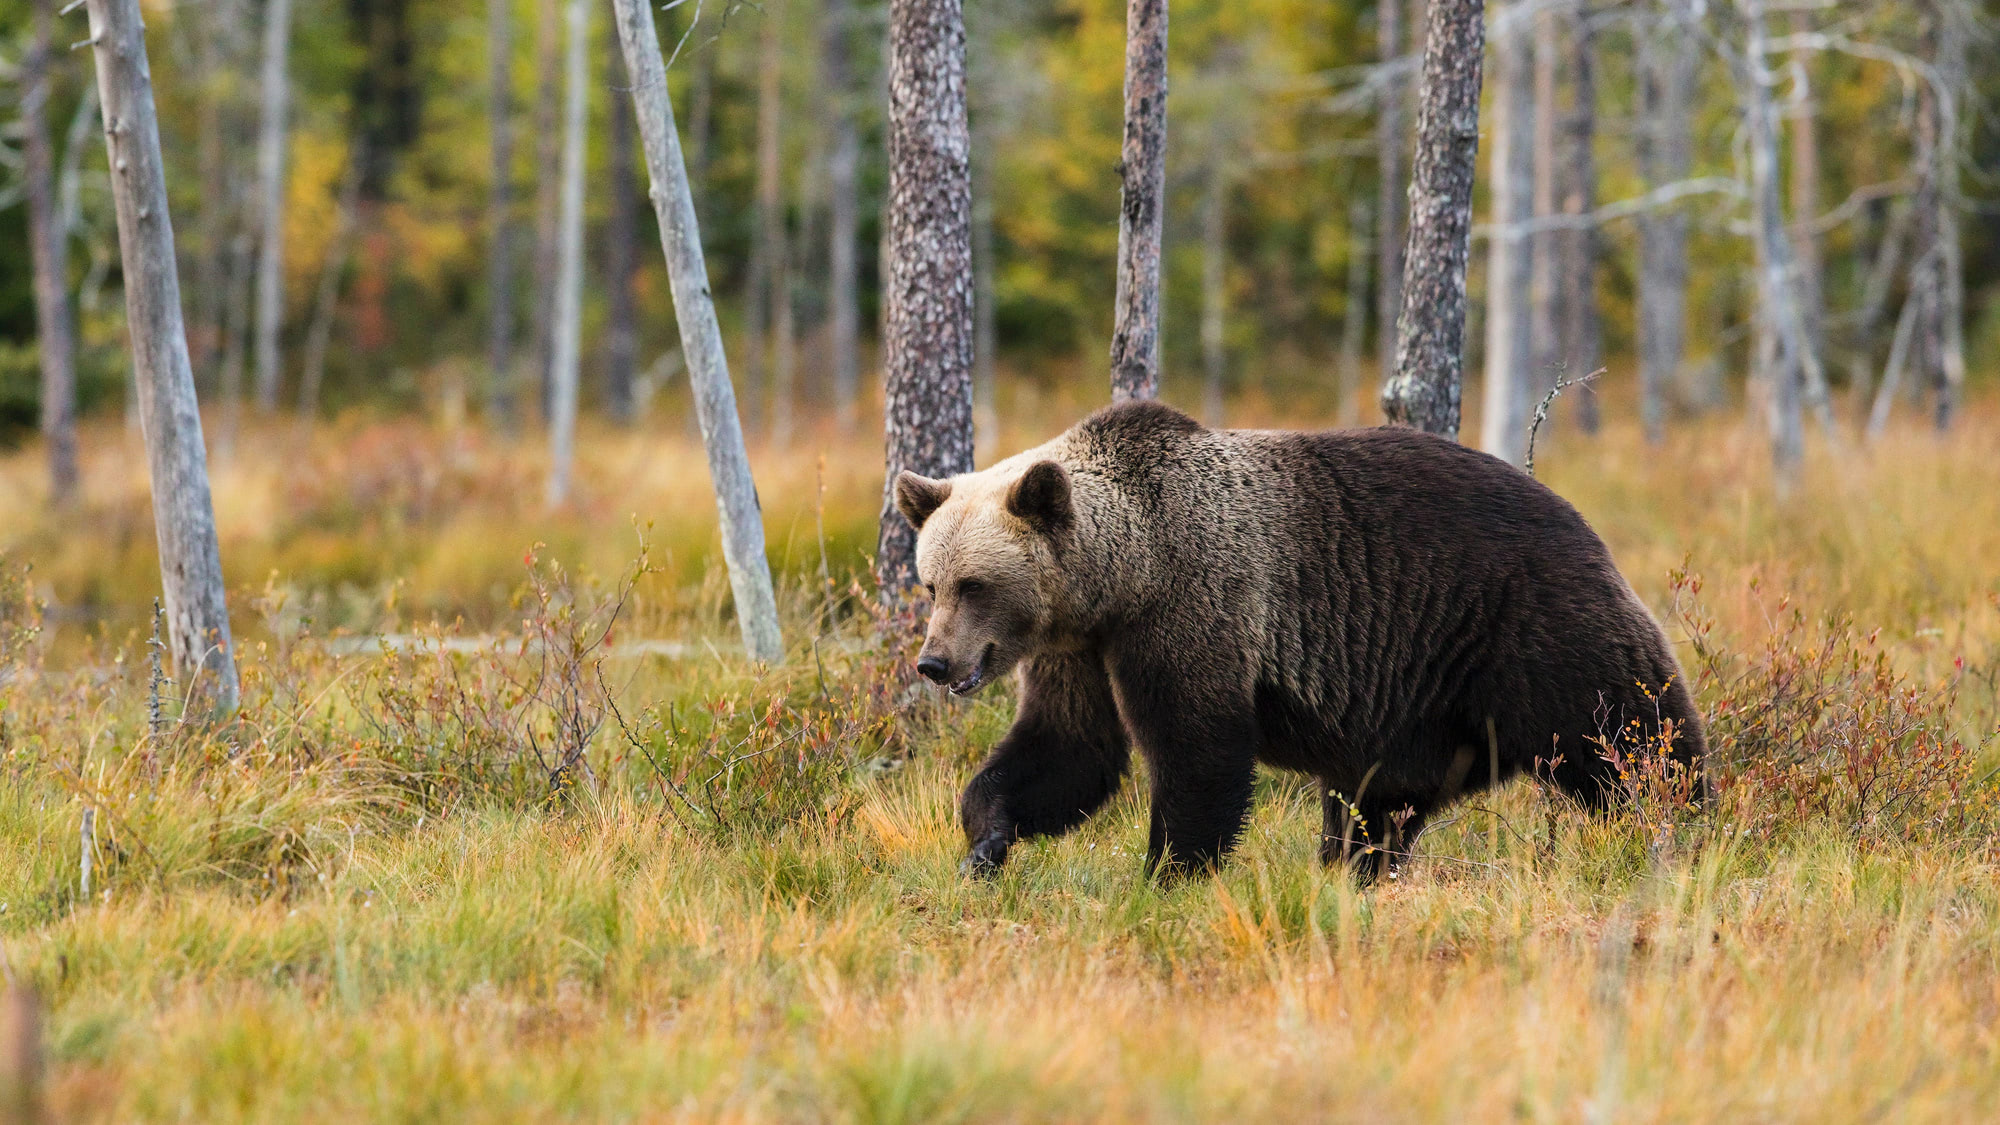 Bear Safety when Hiking and Camping -